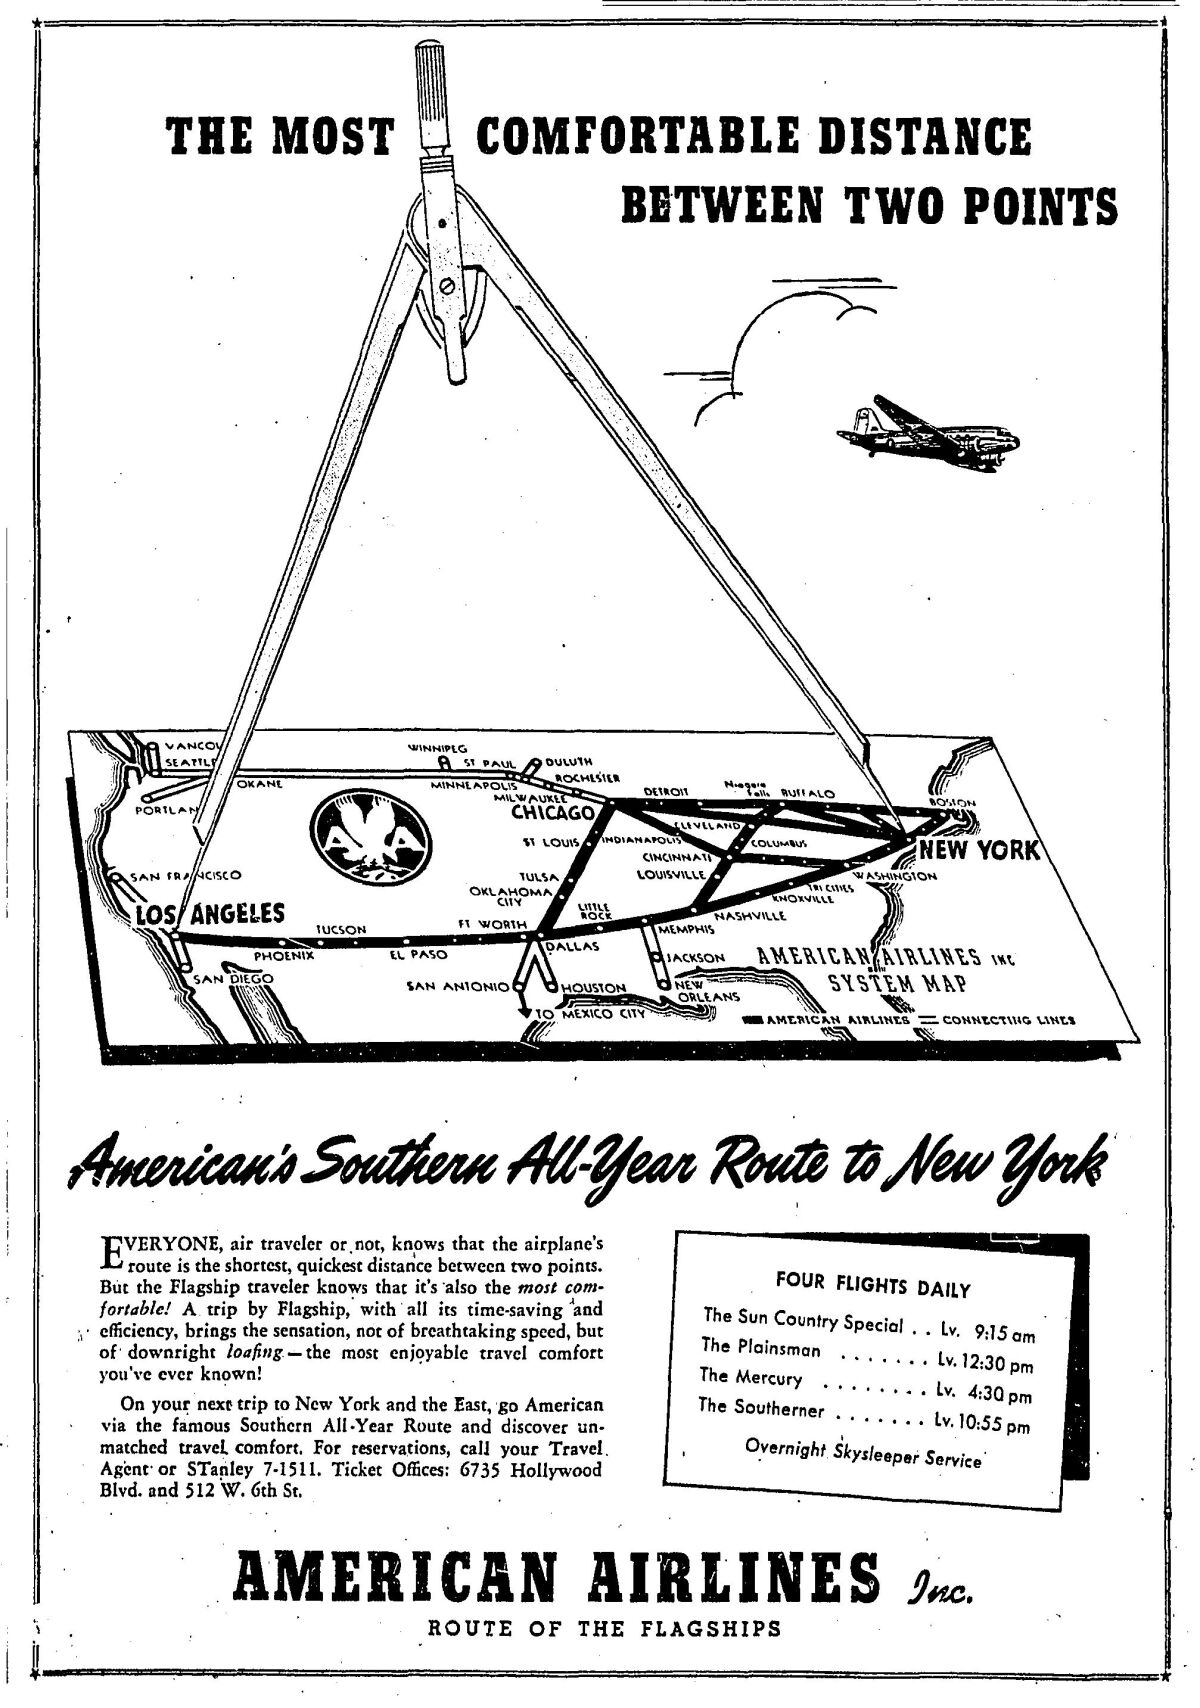 American Airlines advertisment in the Sep. 10, 1940, Los Angeles Times.American featured their all-night flights to New York aboard their sleeper DC-3s.